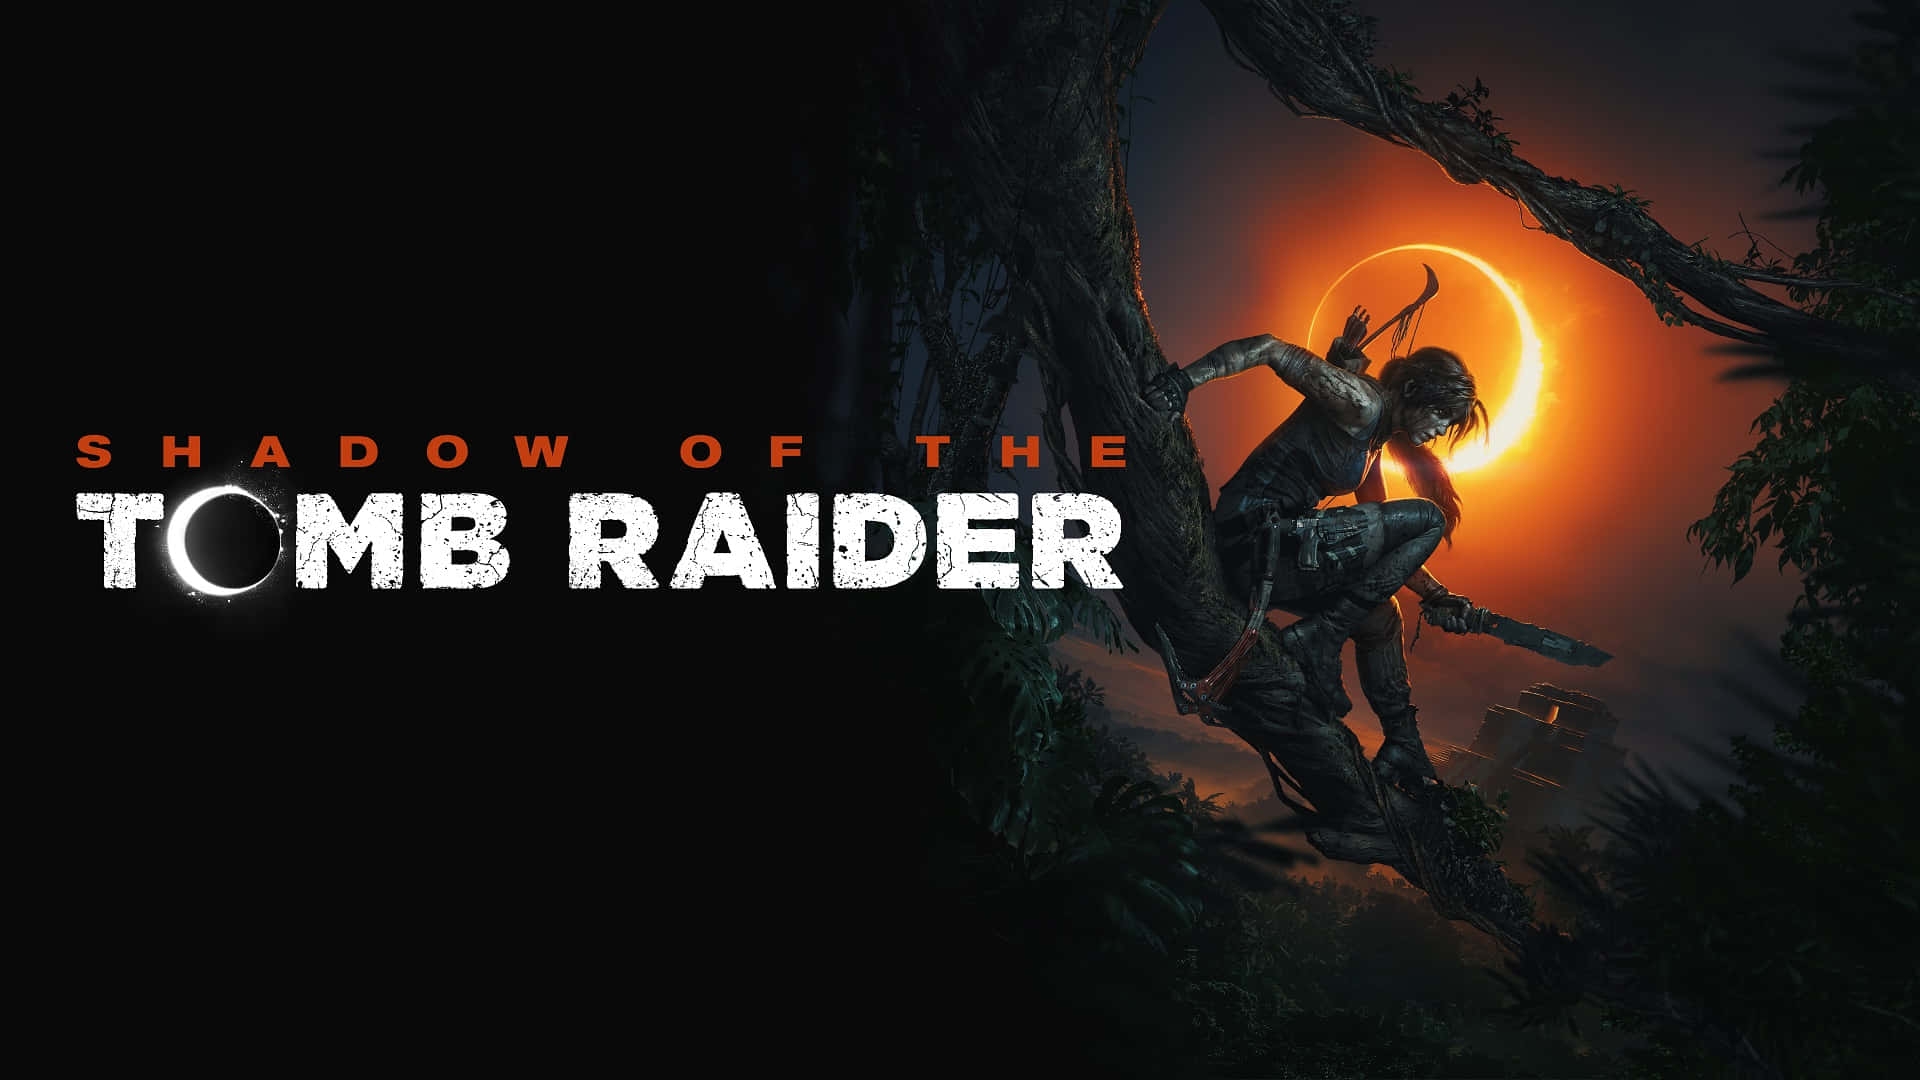 rise of the tomb raider mods may 2016